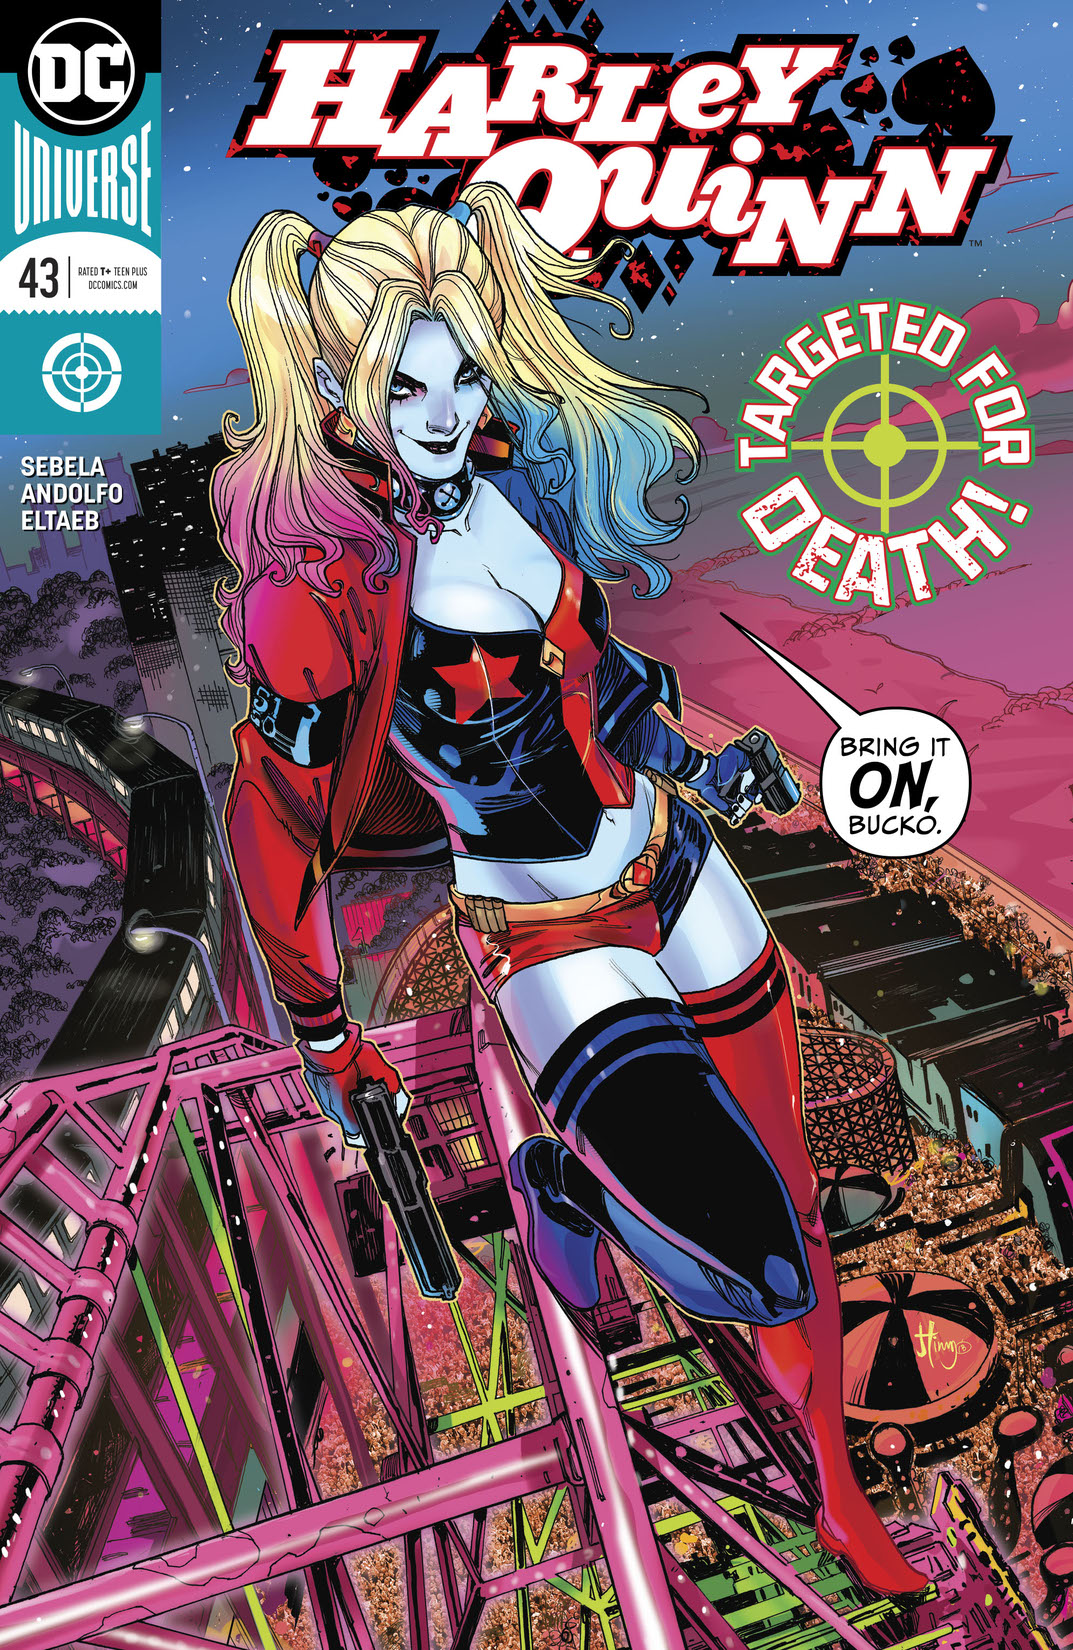 Harley Quinn (2016-) #43 preview images